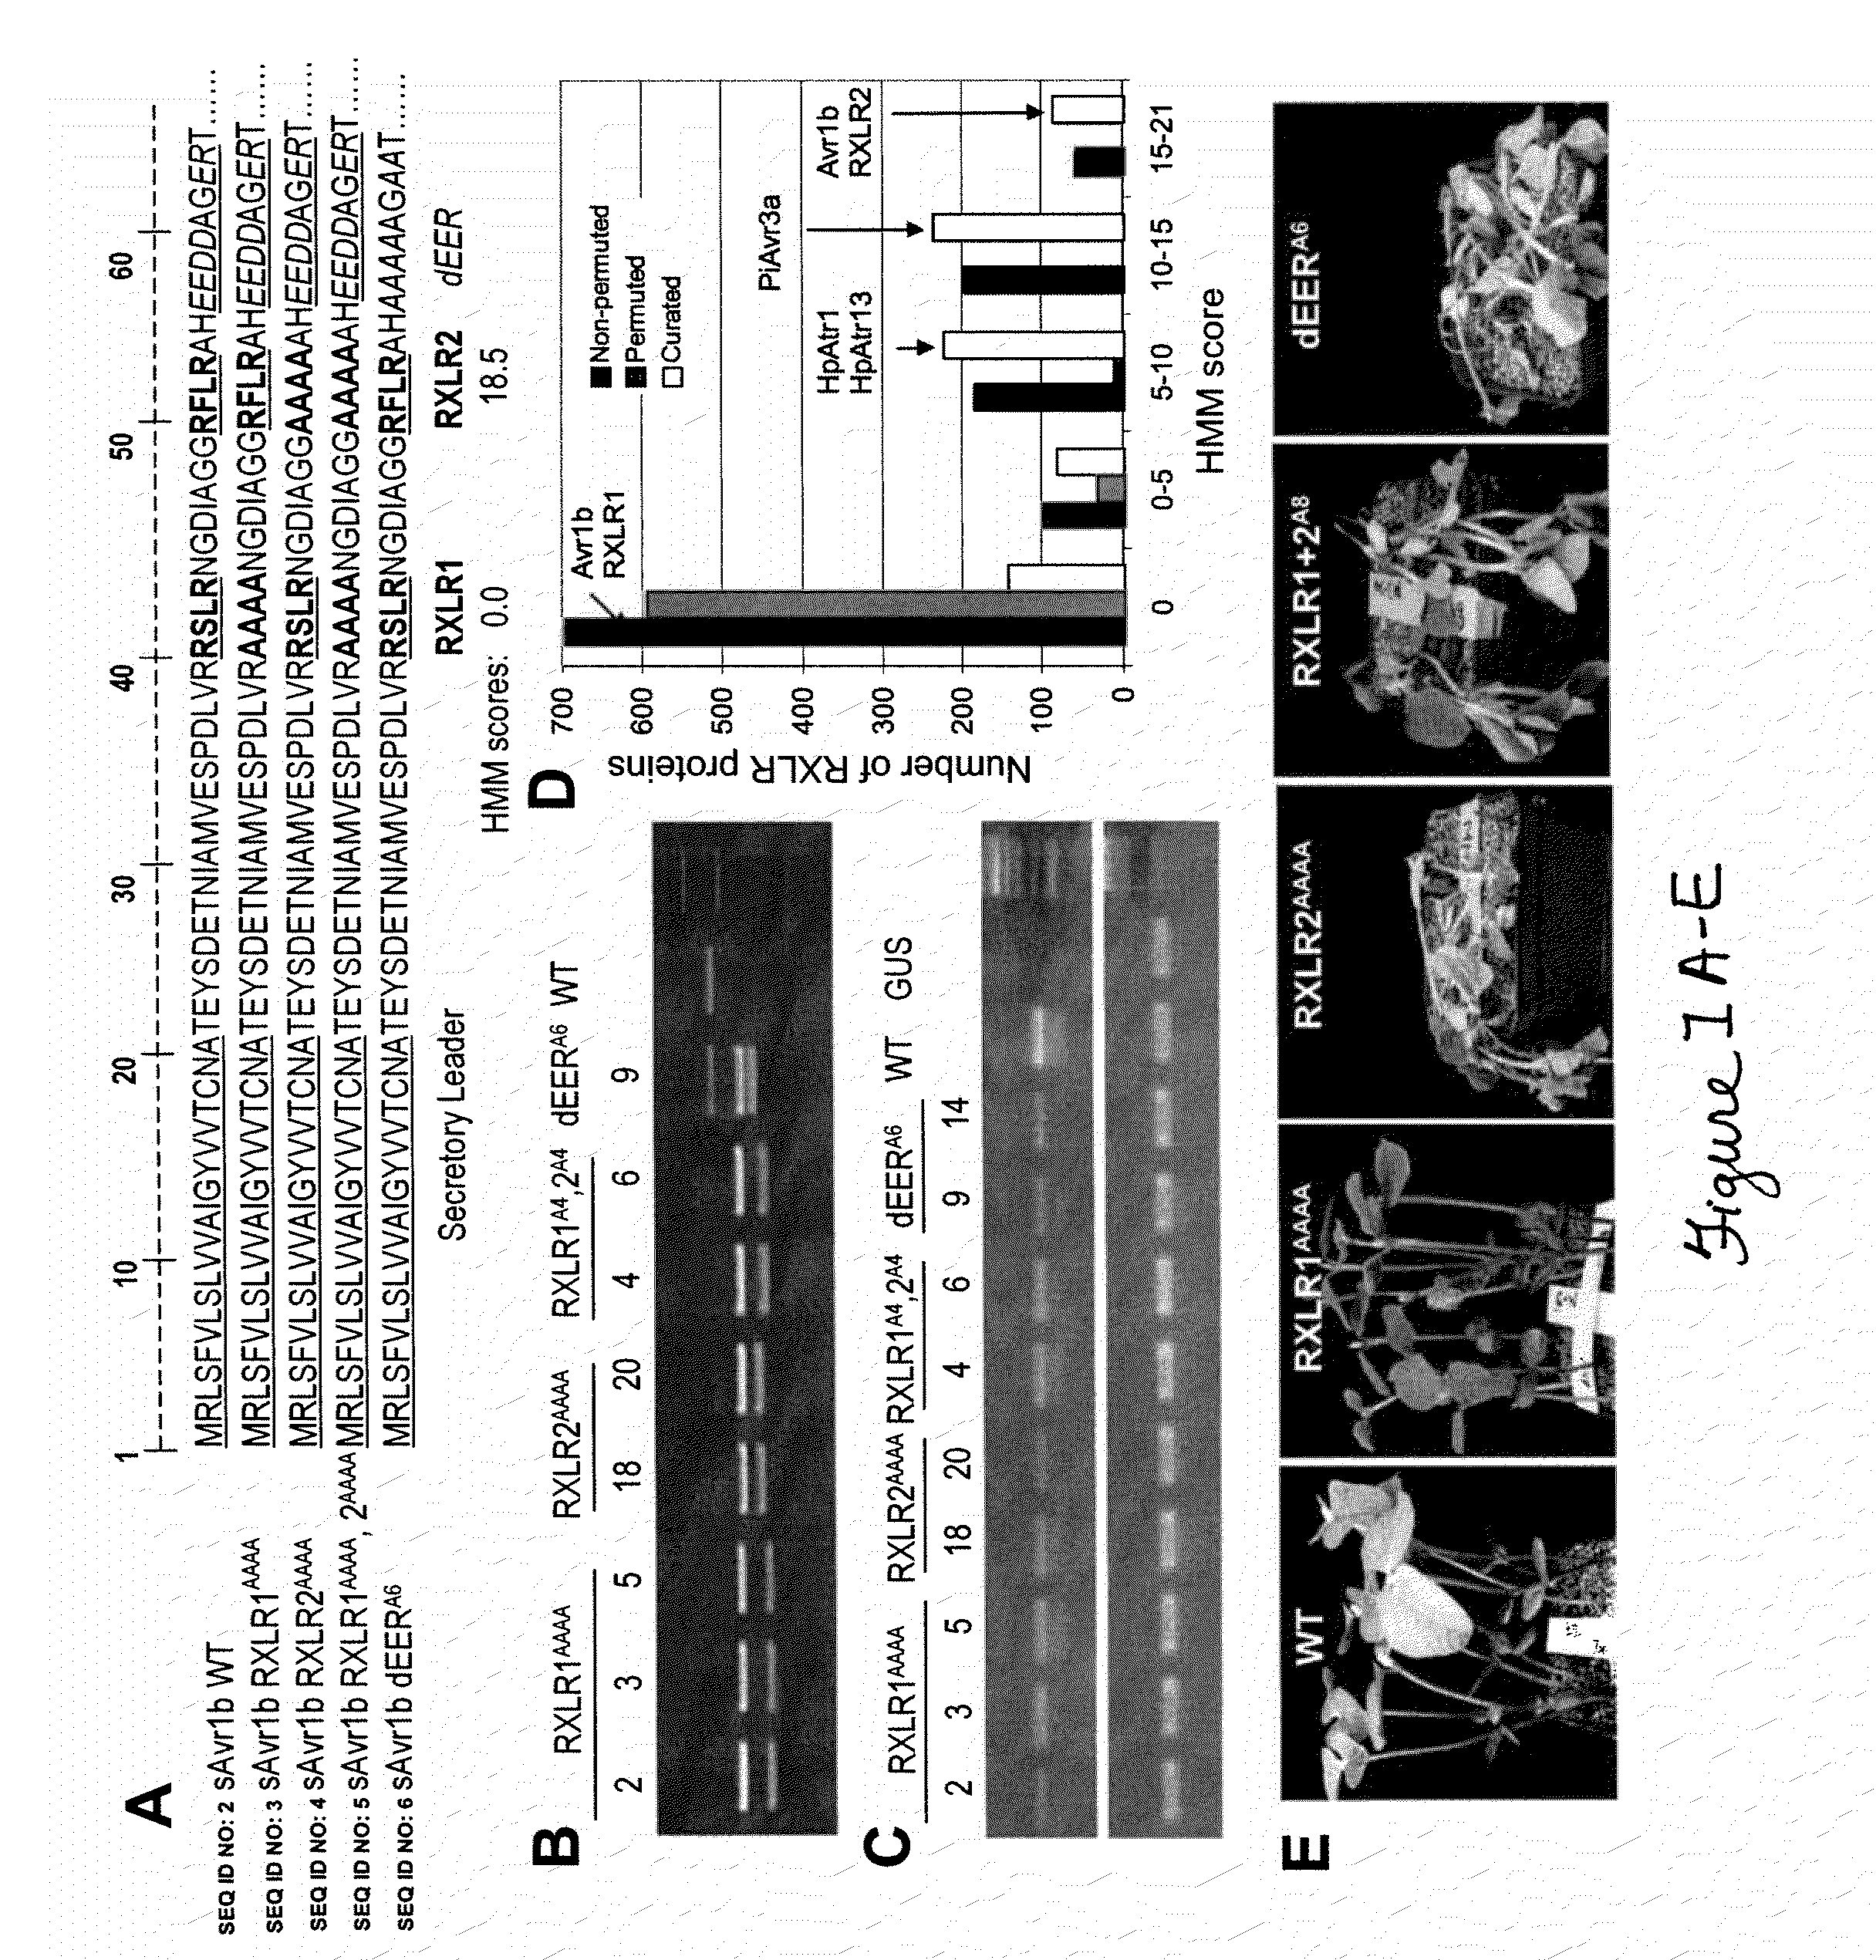 Compositions and methods to protect cells by blocking entry of pathogen proteins